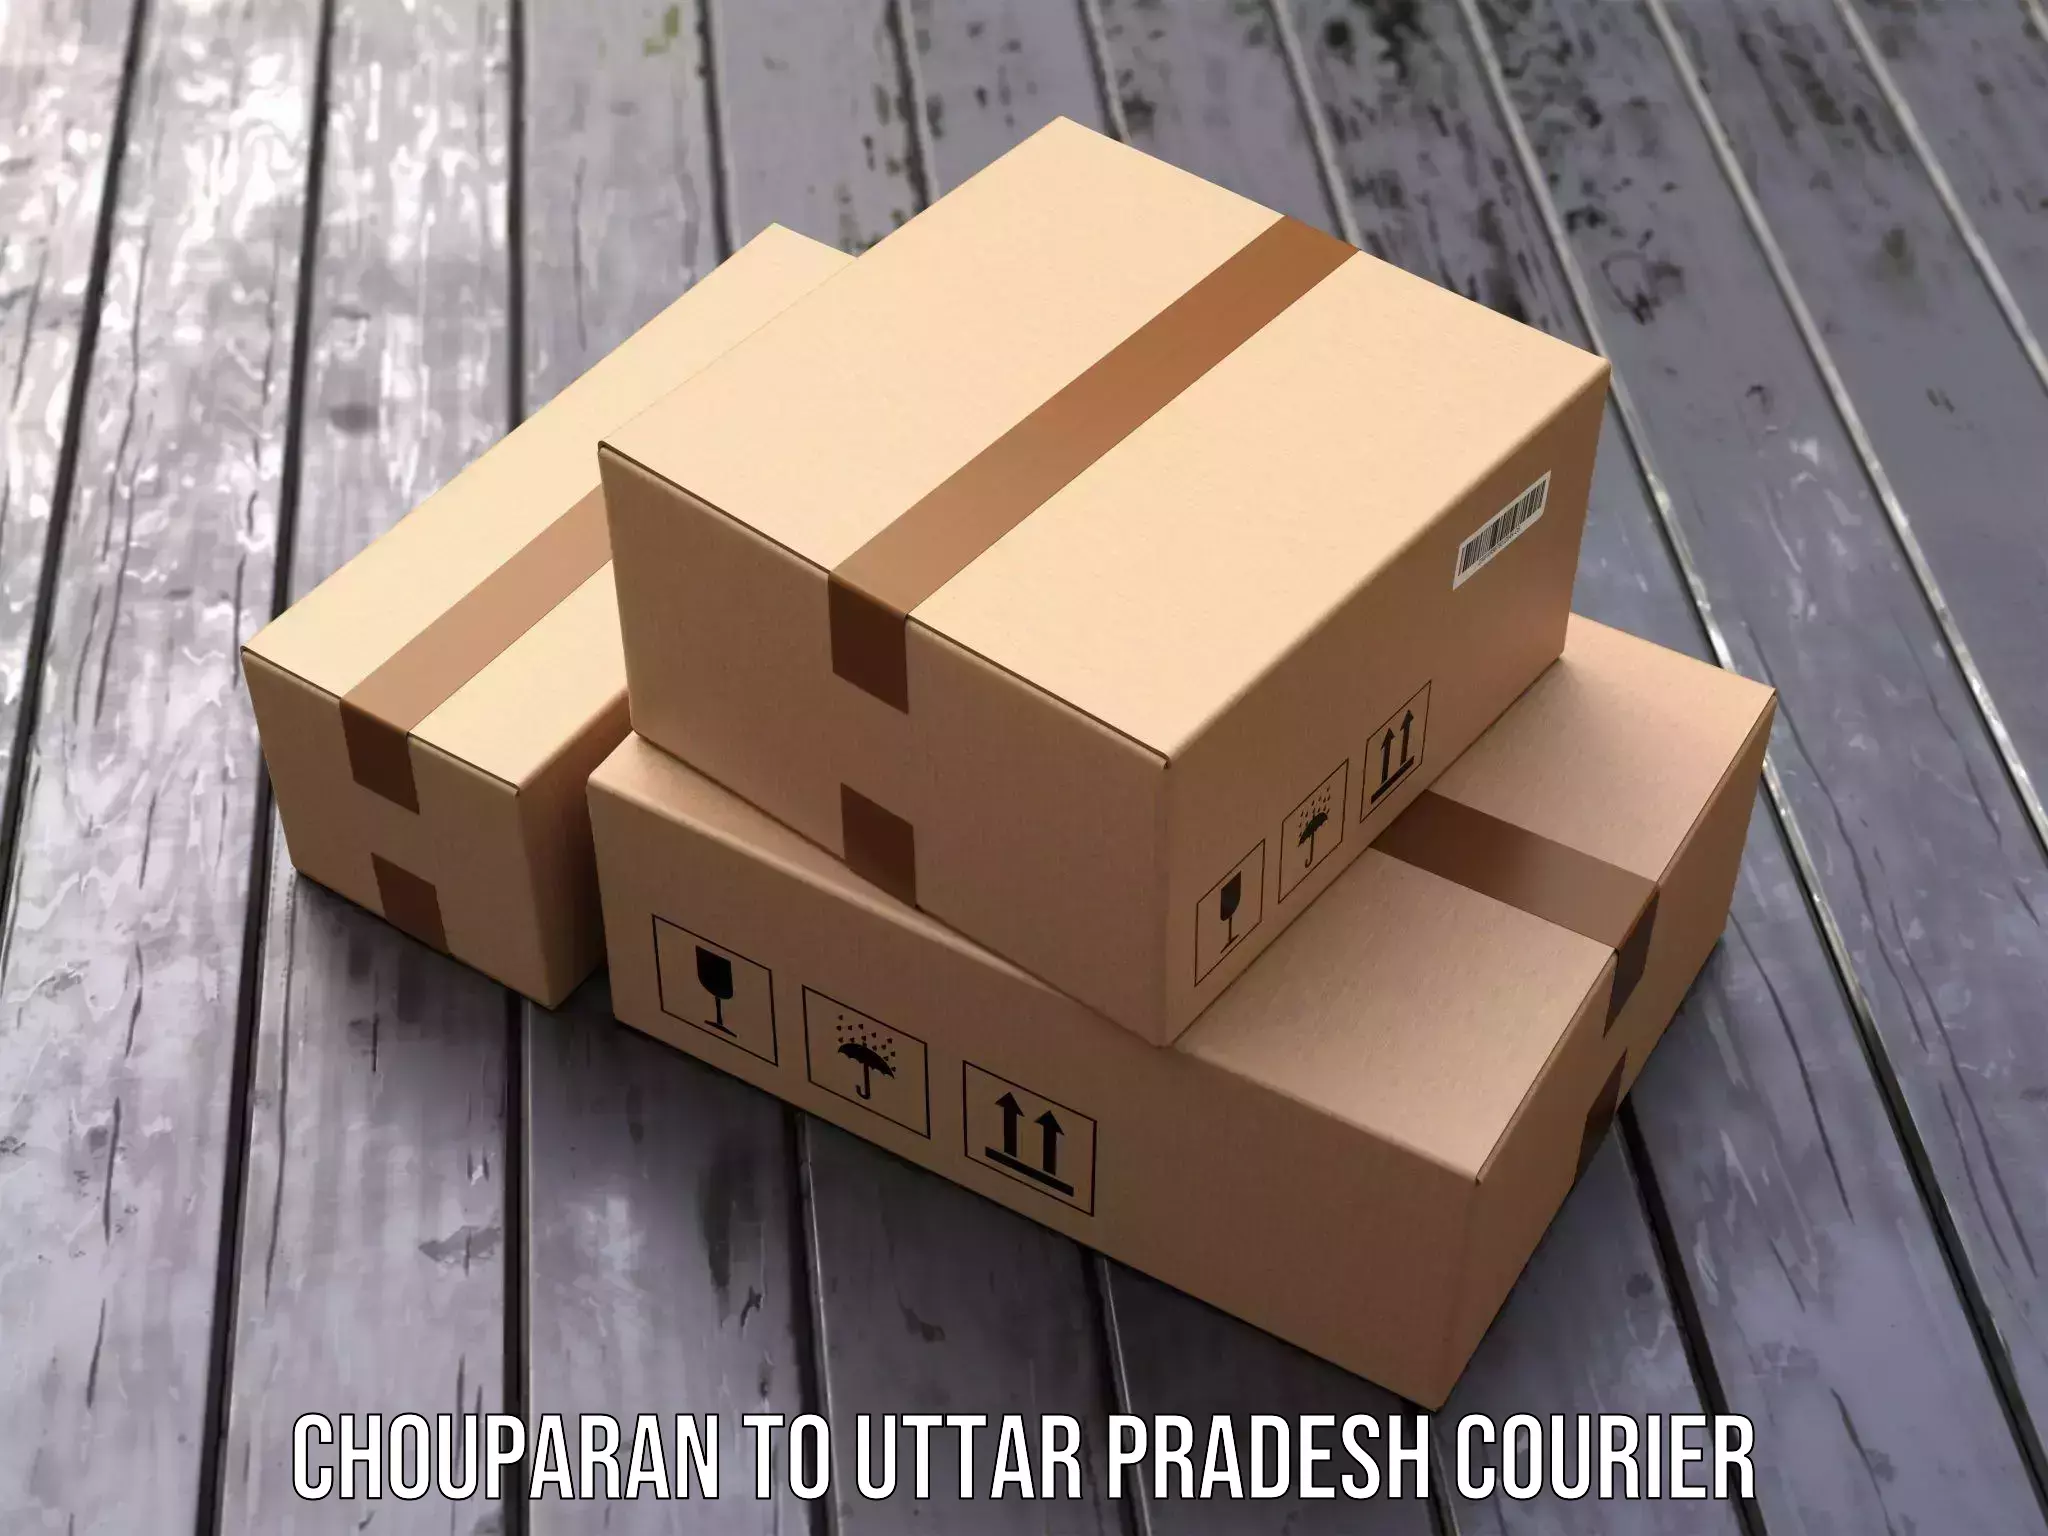 Courier service innovation Chouparan to Chandausi